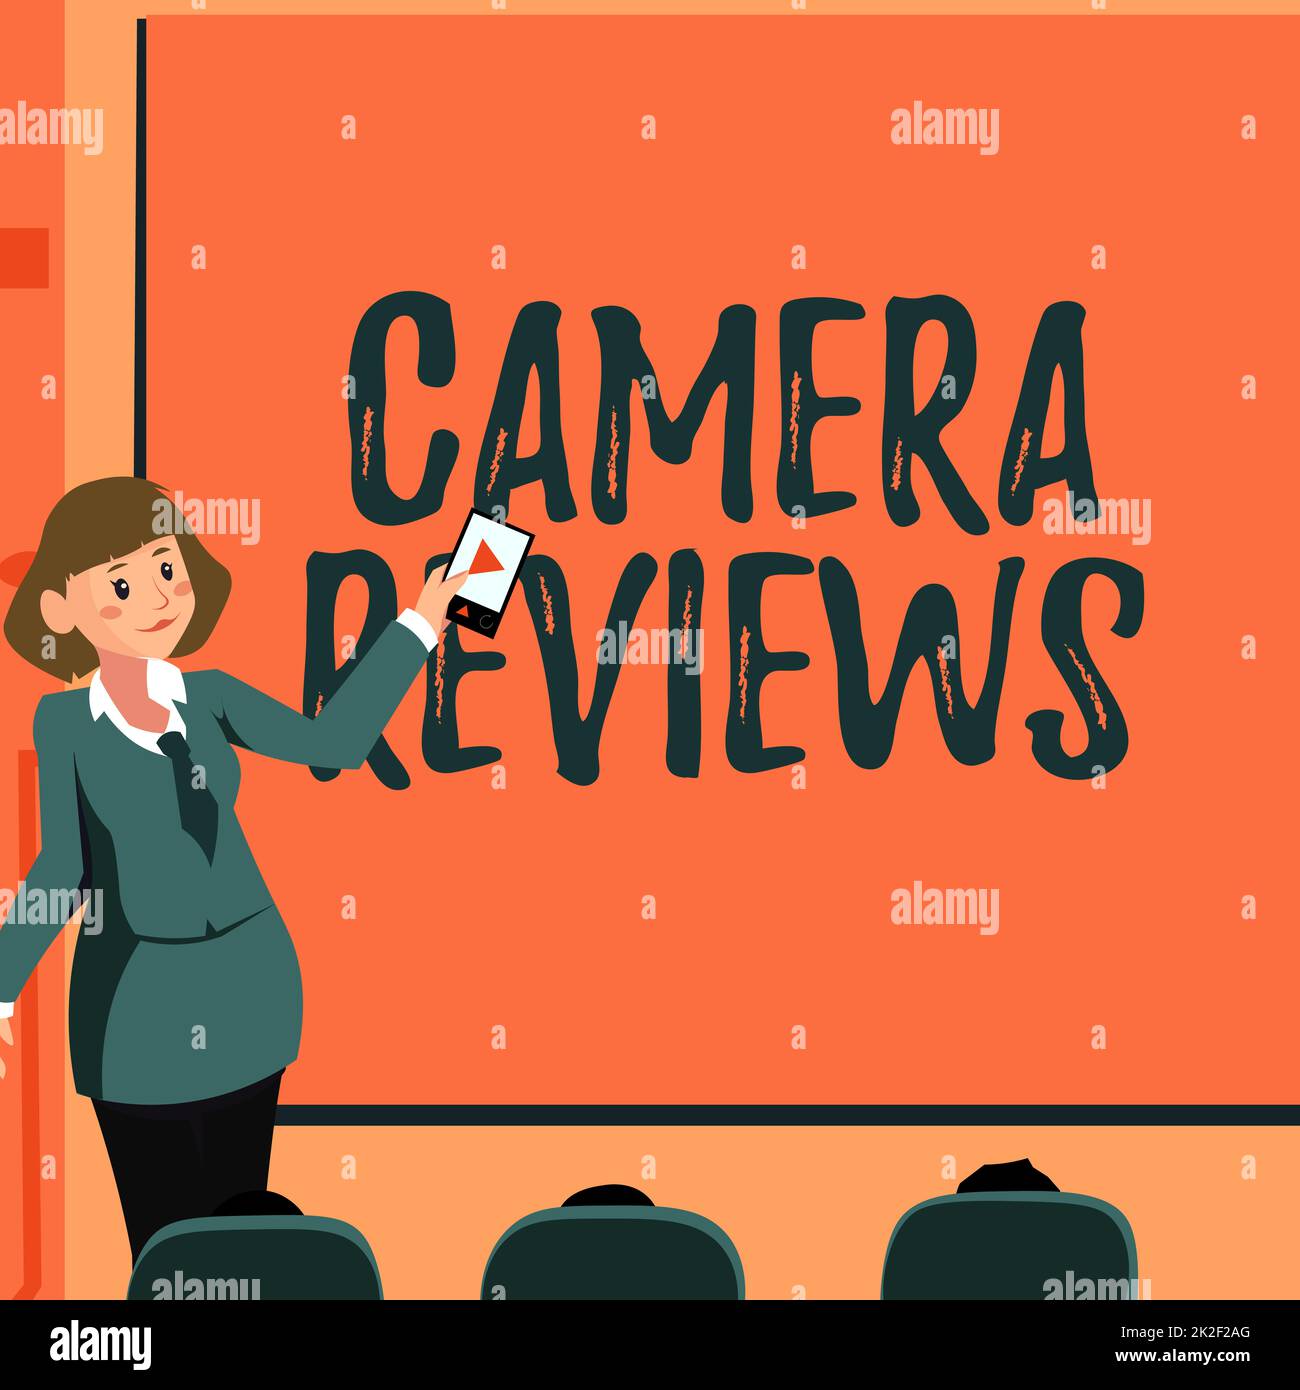 Text caption presenting Camera Reviews. Business idea examine or assess formally with the possibility to change Woman Holding Remote Control Presenting Newest Ideas On Backdrop Screen. Stock Photo